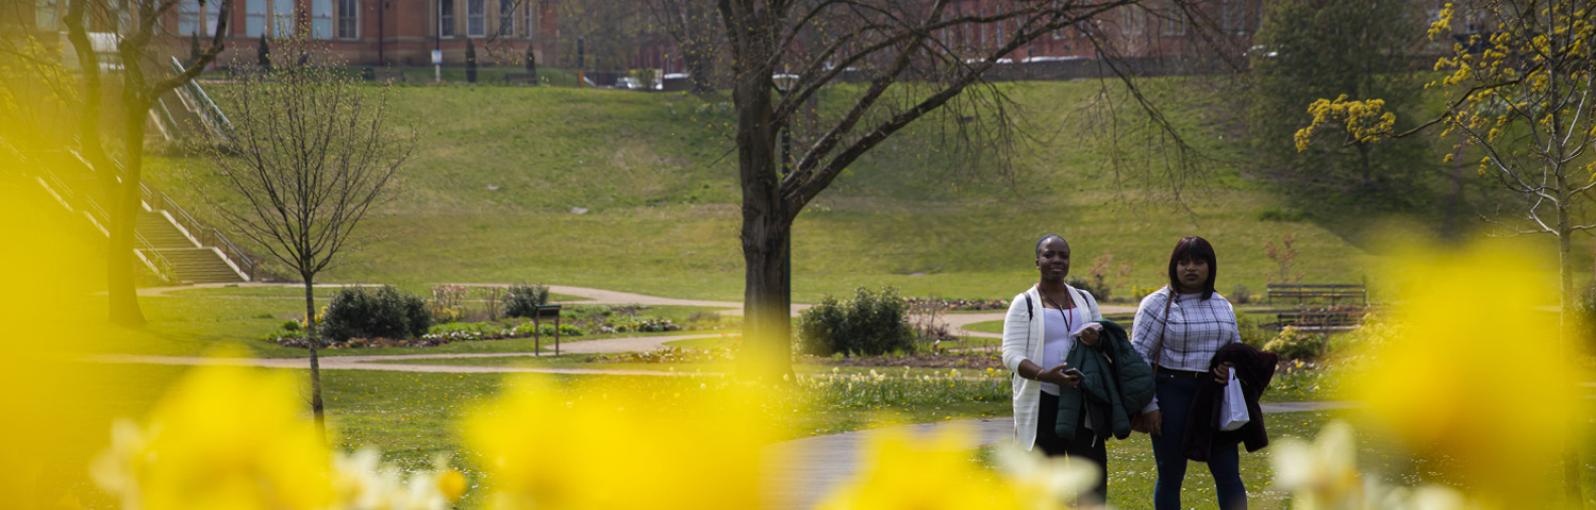 Two students walking through Peel Park in spring with daffodils in the foreground